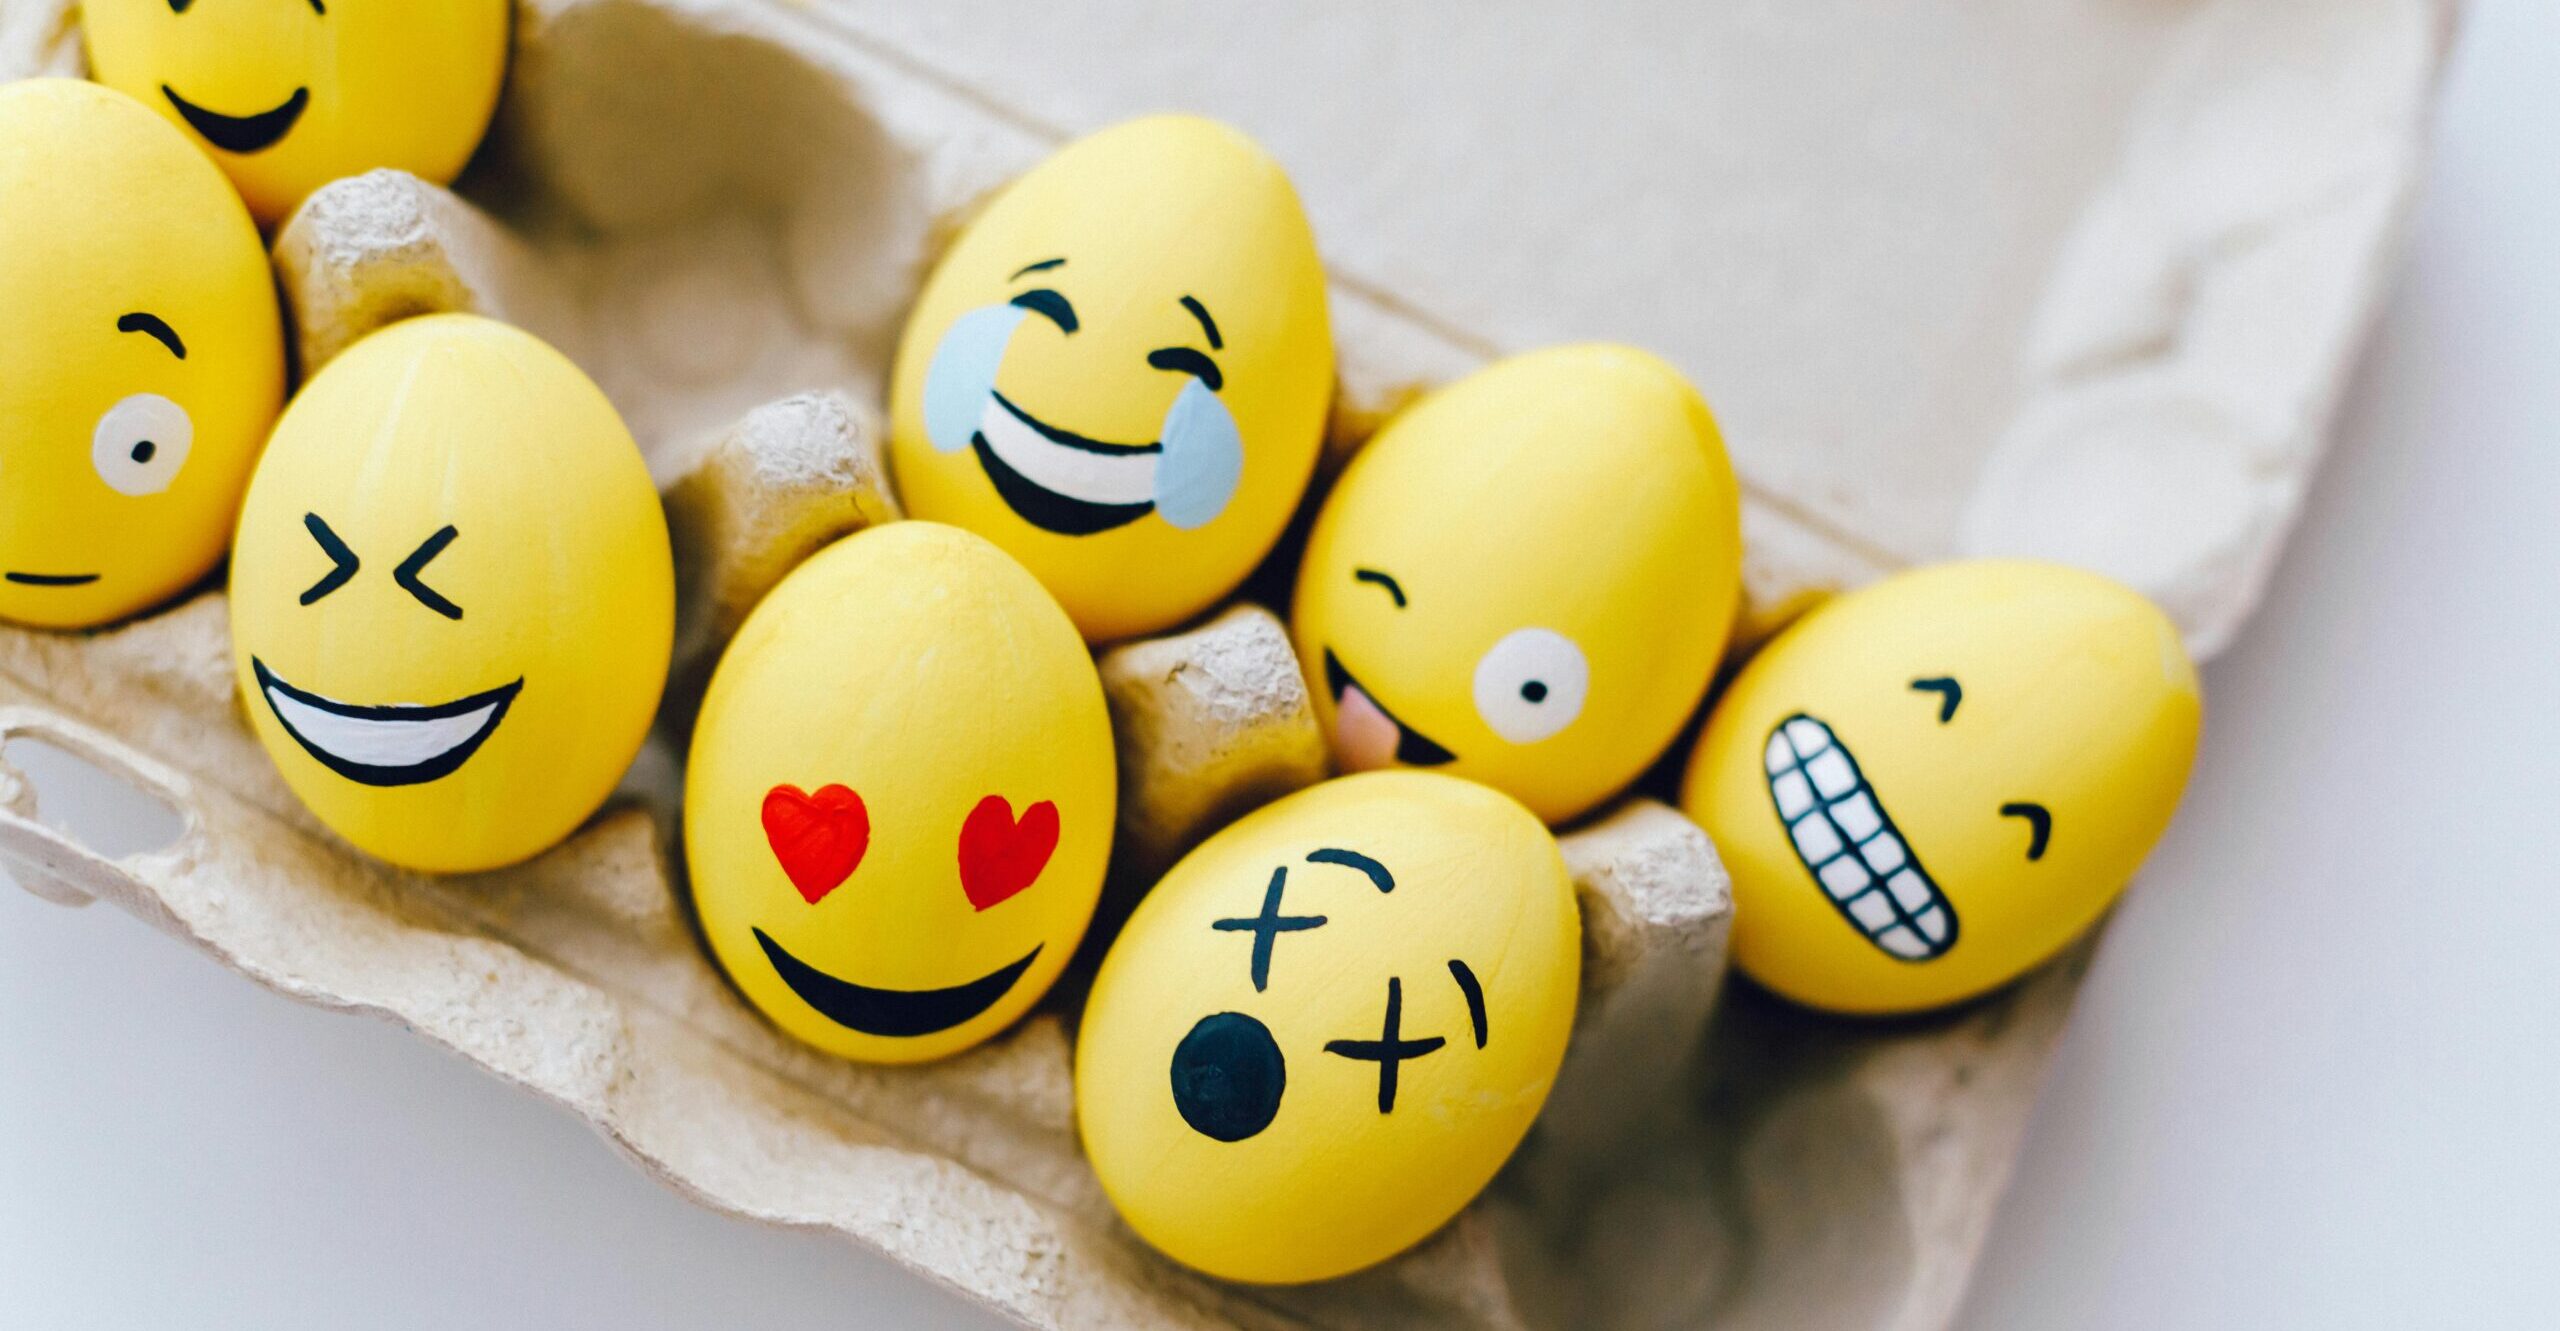 Yellow painted eggs with various facial expressions.